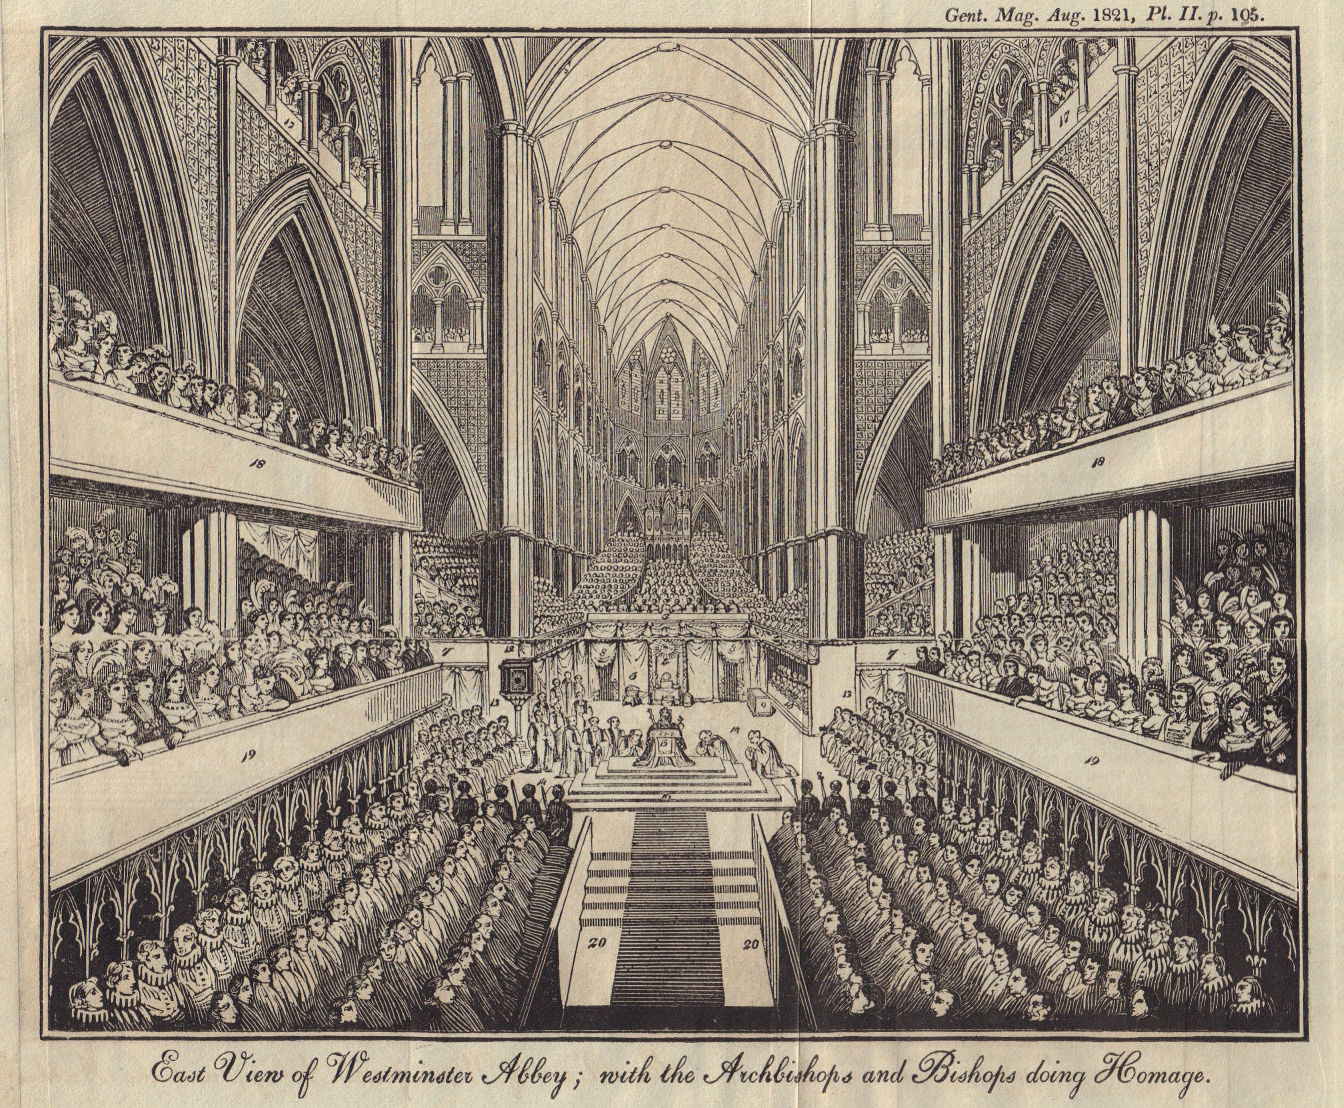 Westminster Abbey George IV Coronation 1821. Archbishops paying homage 1821